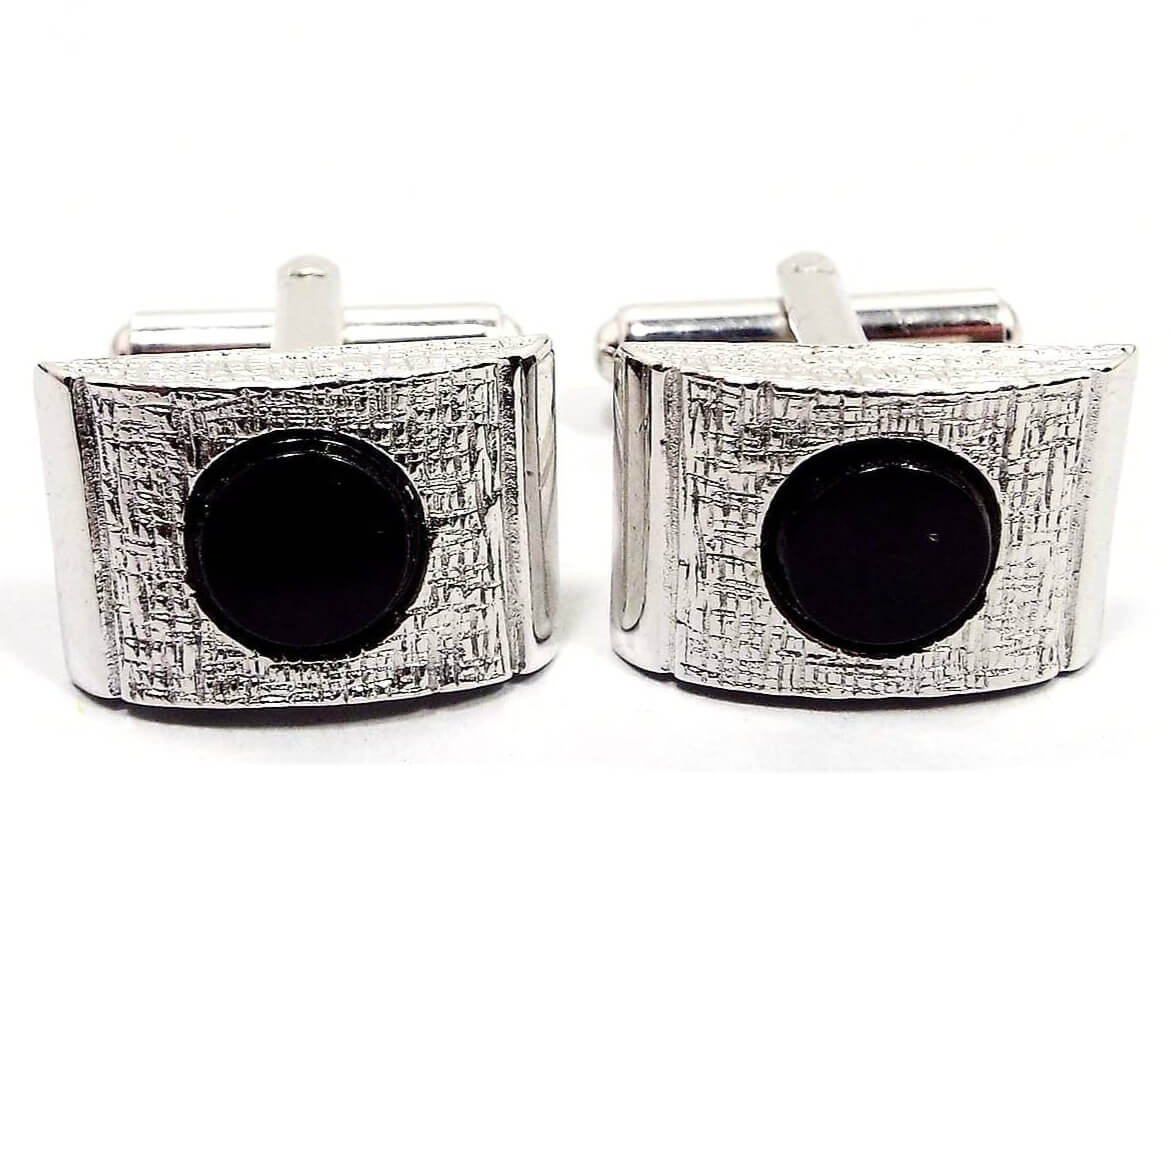 Front view of the retro vintage silver tone and black cufflinks. The have a domed rectangle shape on the front with a flat round black glass cab in the middle. The silver tone metal on the front is textured.